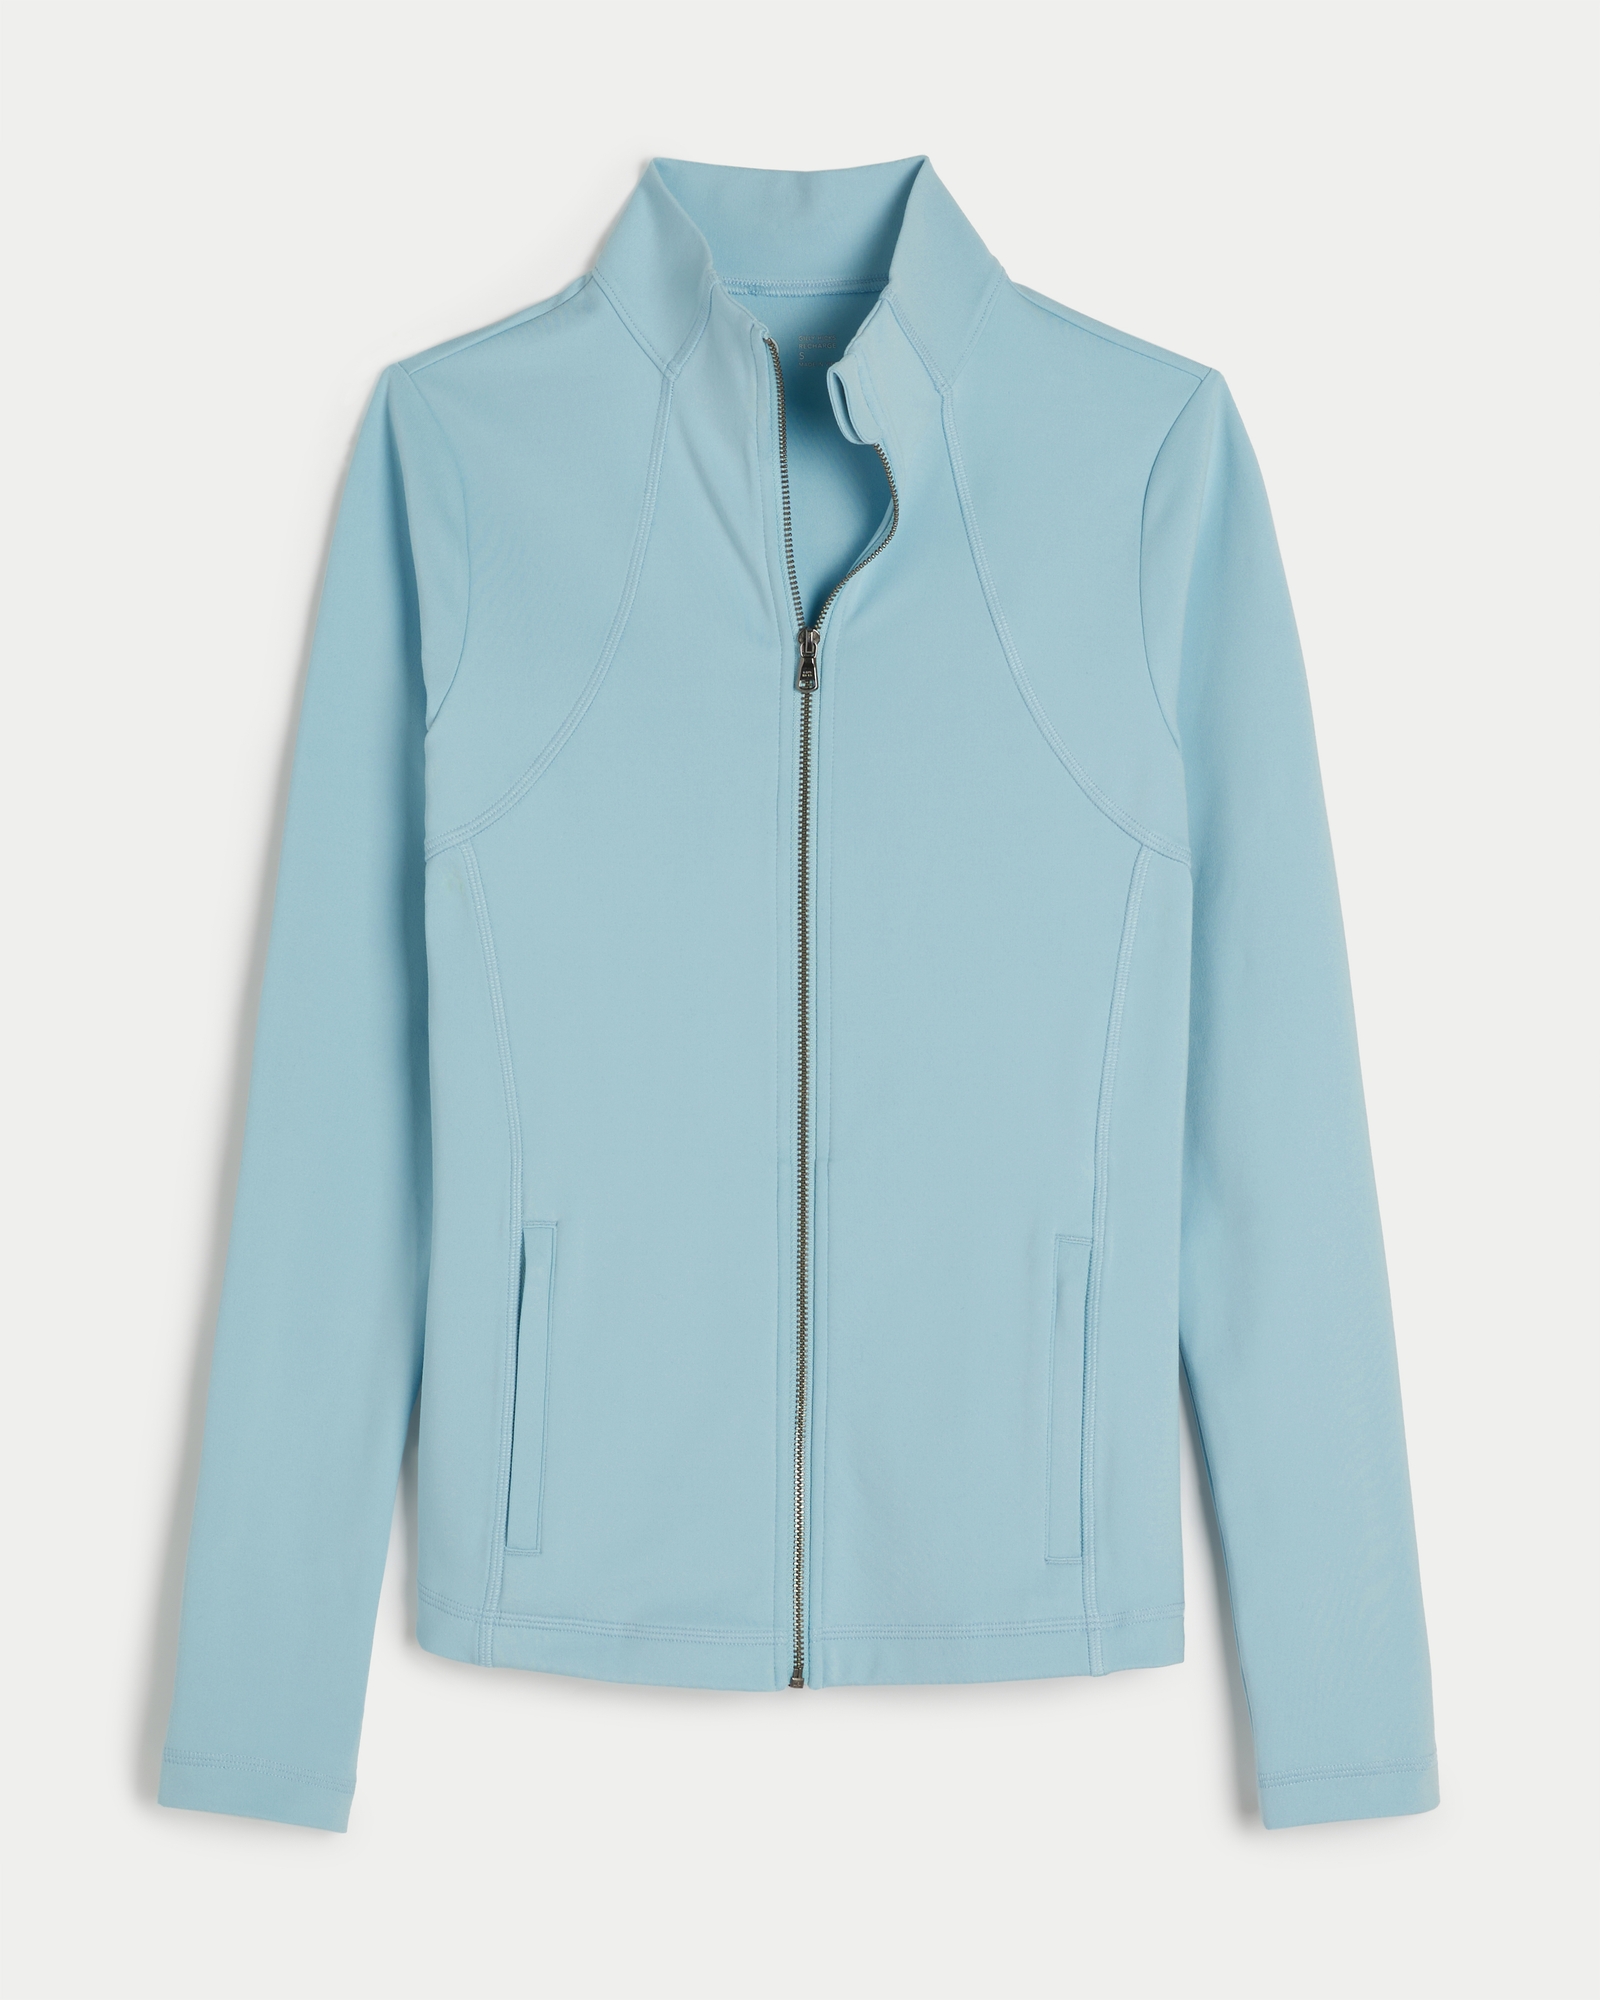 Hollister Co. Soft Shell Athletic Jackets for Women